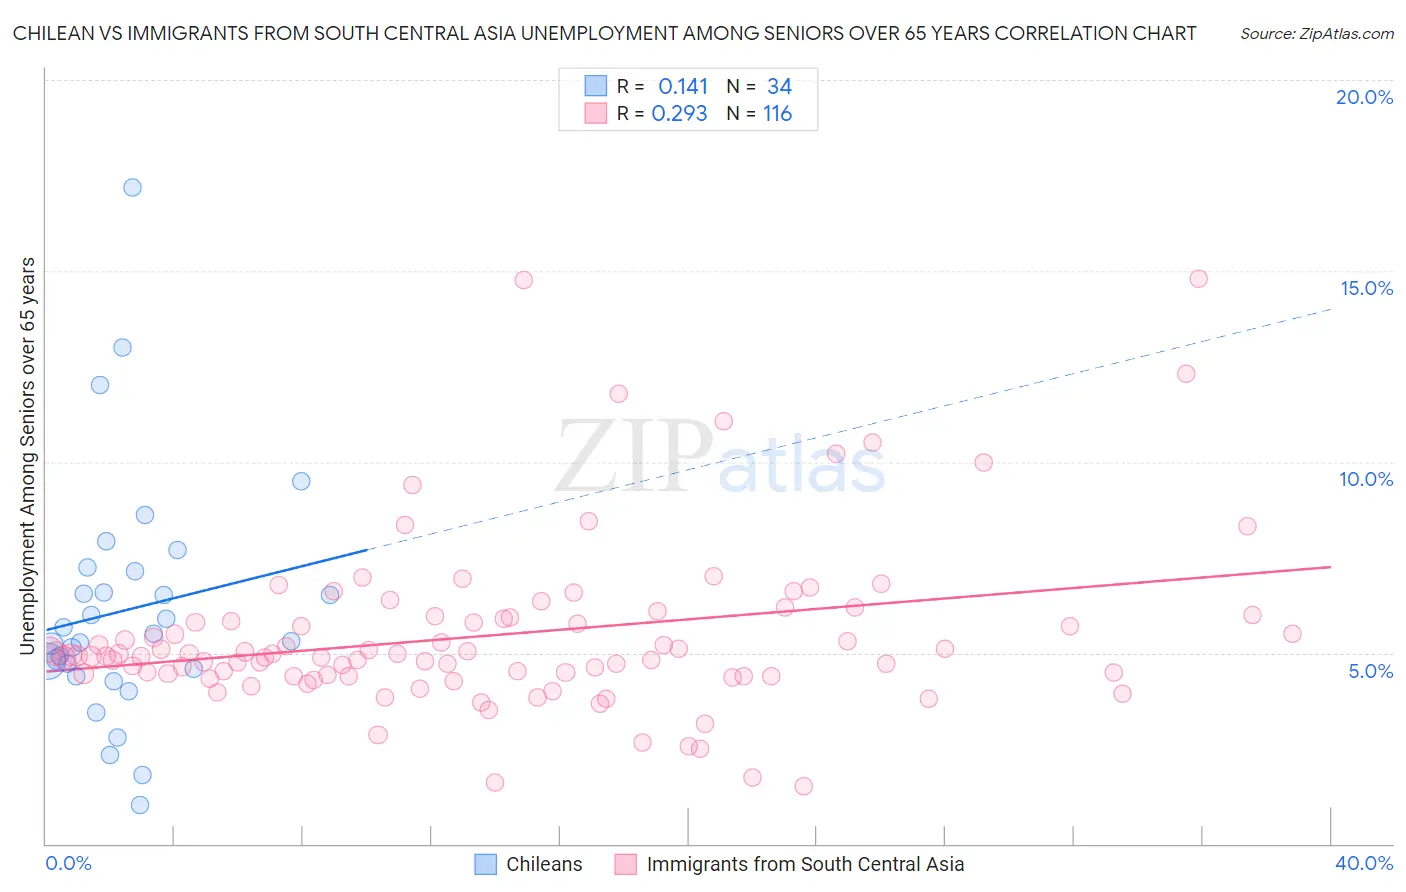 Chilean vs Immigrants from South Central Asia Unemployment Among Seniors over 65 years